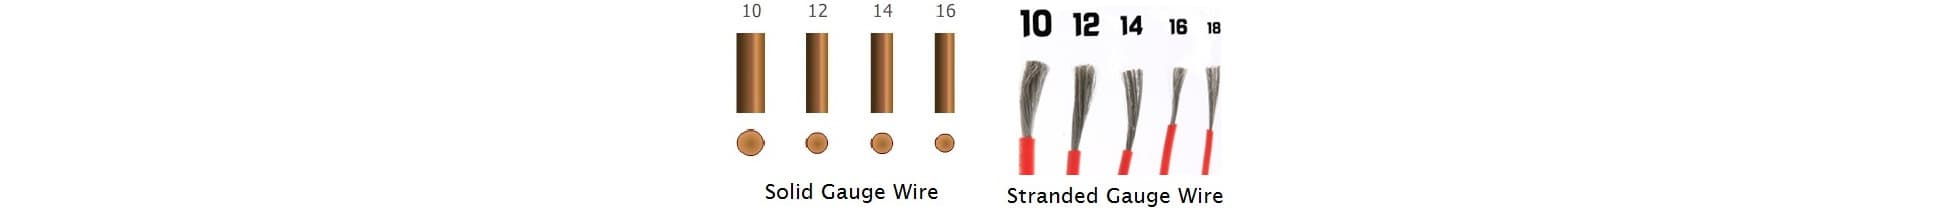 Solid Gauge Wire Size Chart,Stranded Gauge Wire Size Chart